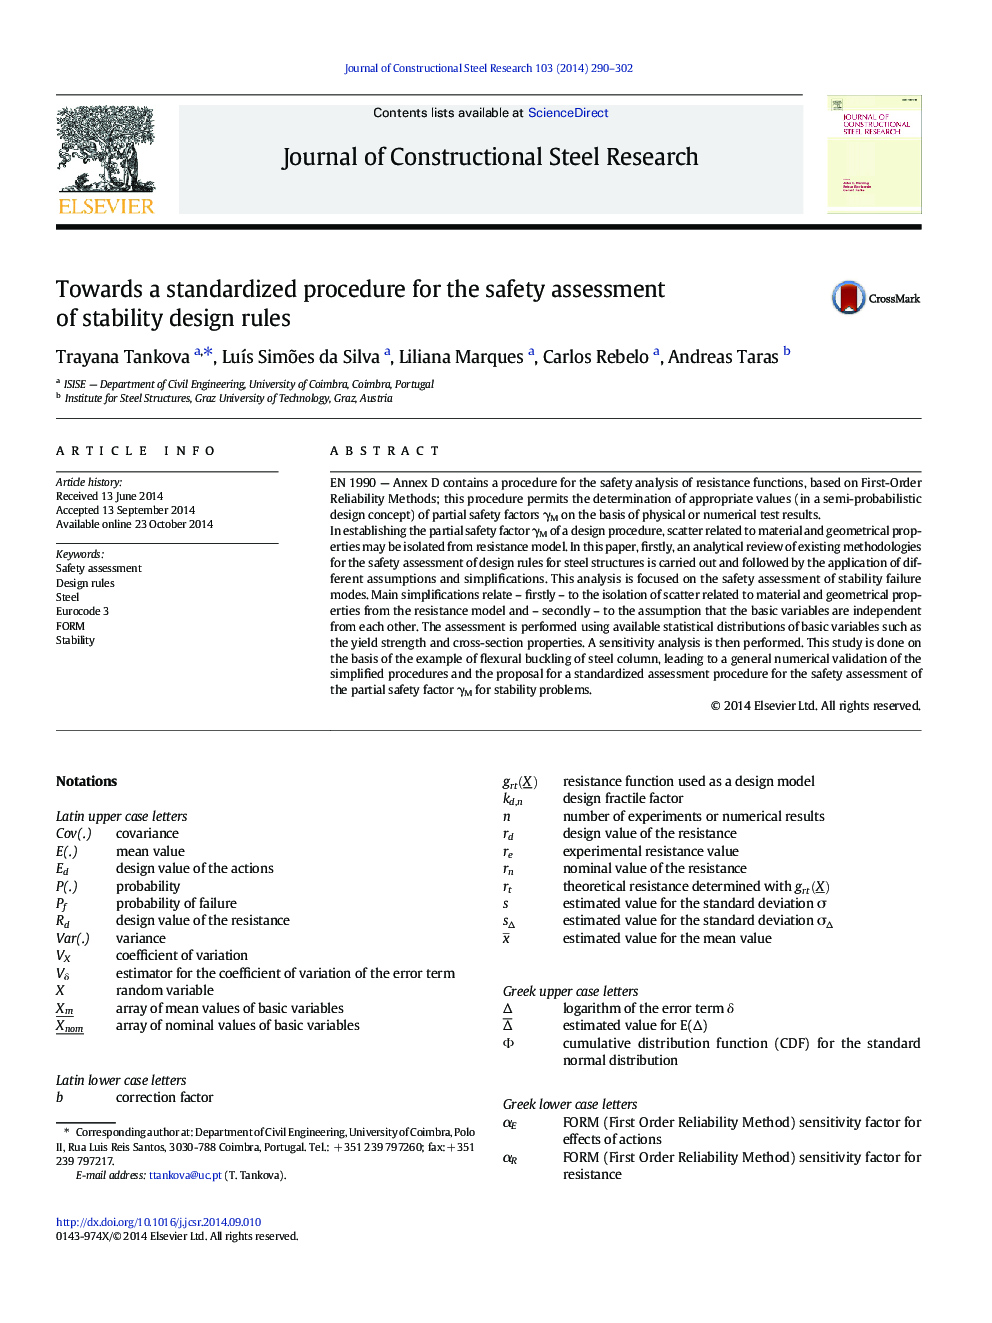 Towards a standardized procedure for the safety assessment of stability design rules